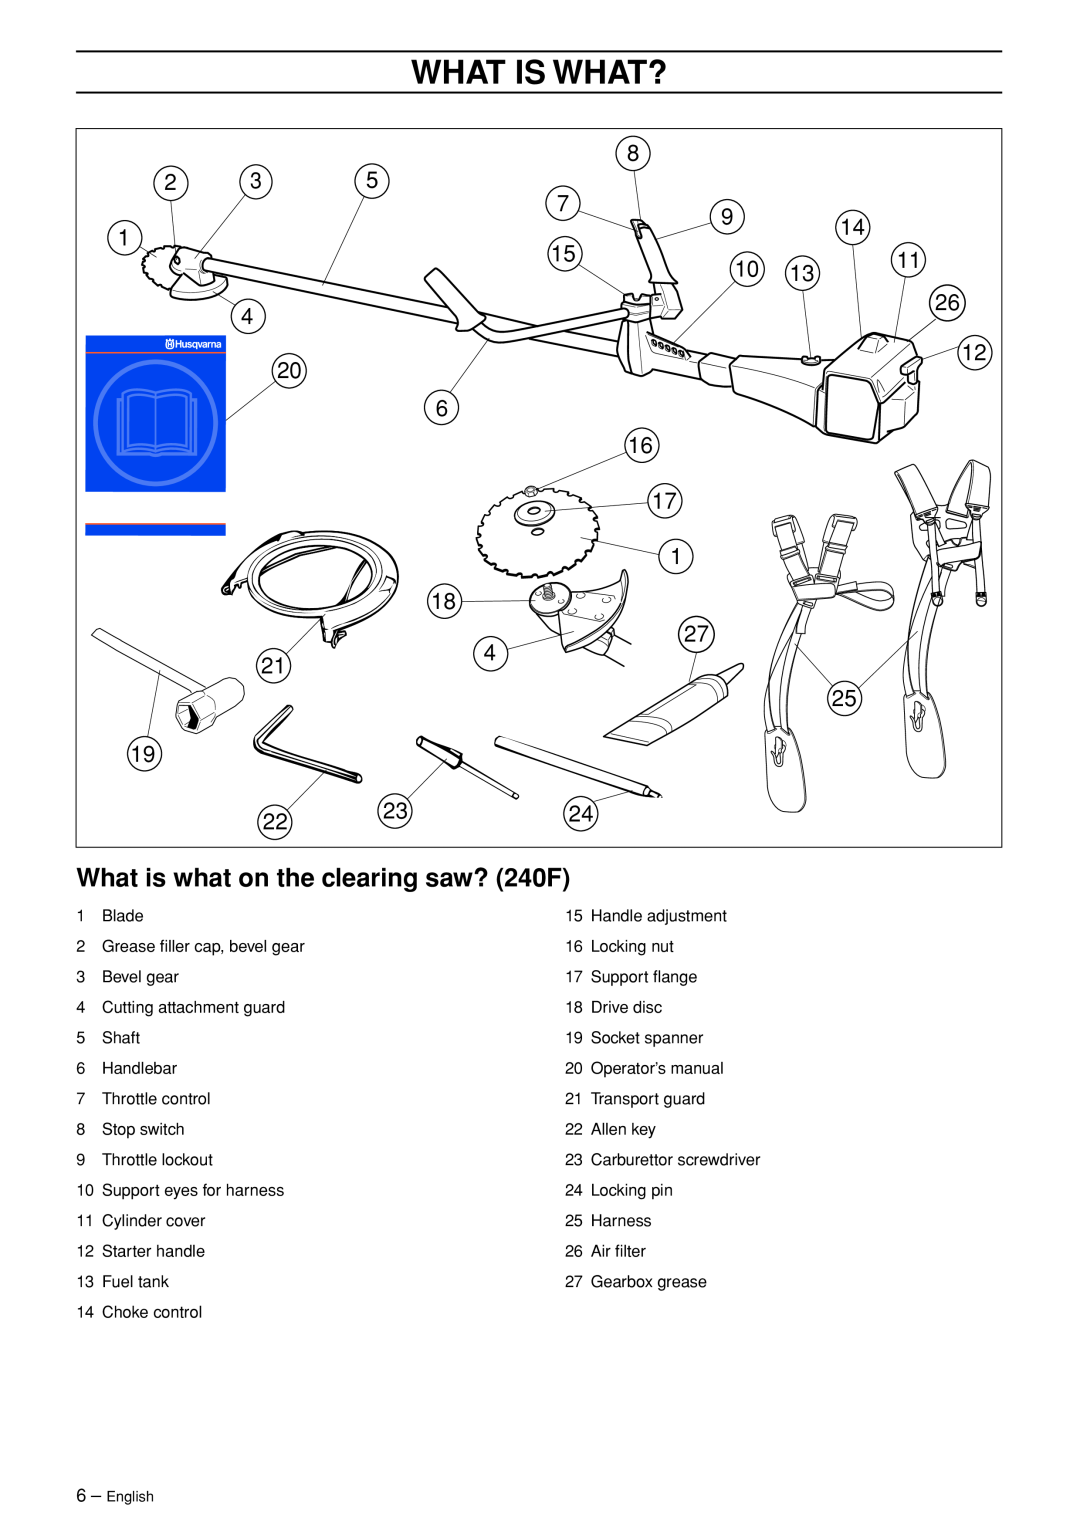 Husqvarna 250 R manual What is what on the clearing saw? 240F, What Is What?, Carburettor screwdriver, English 